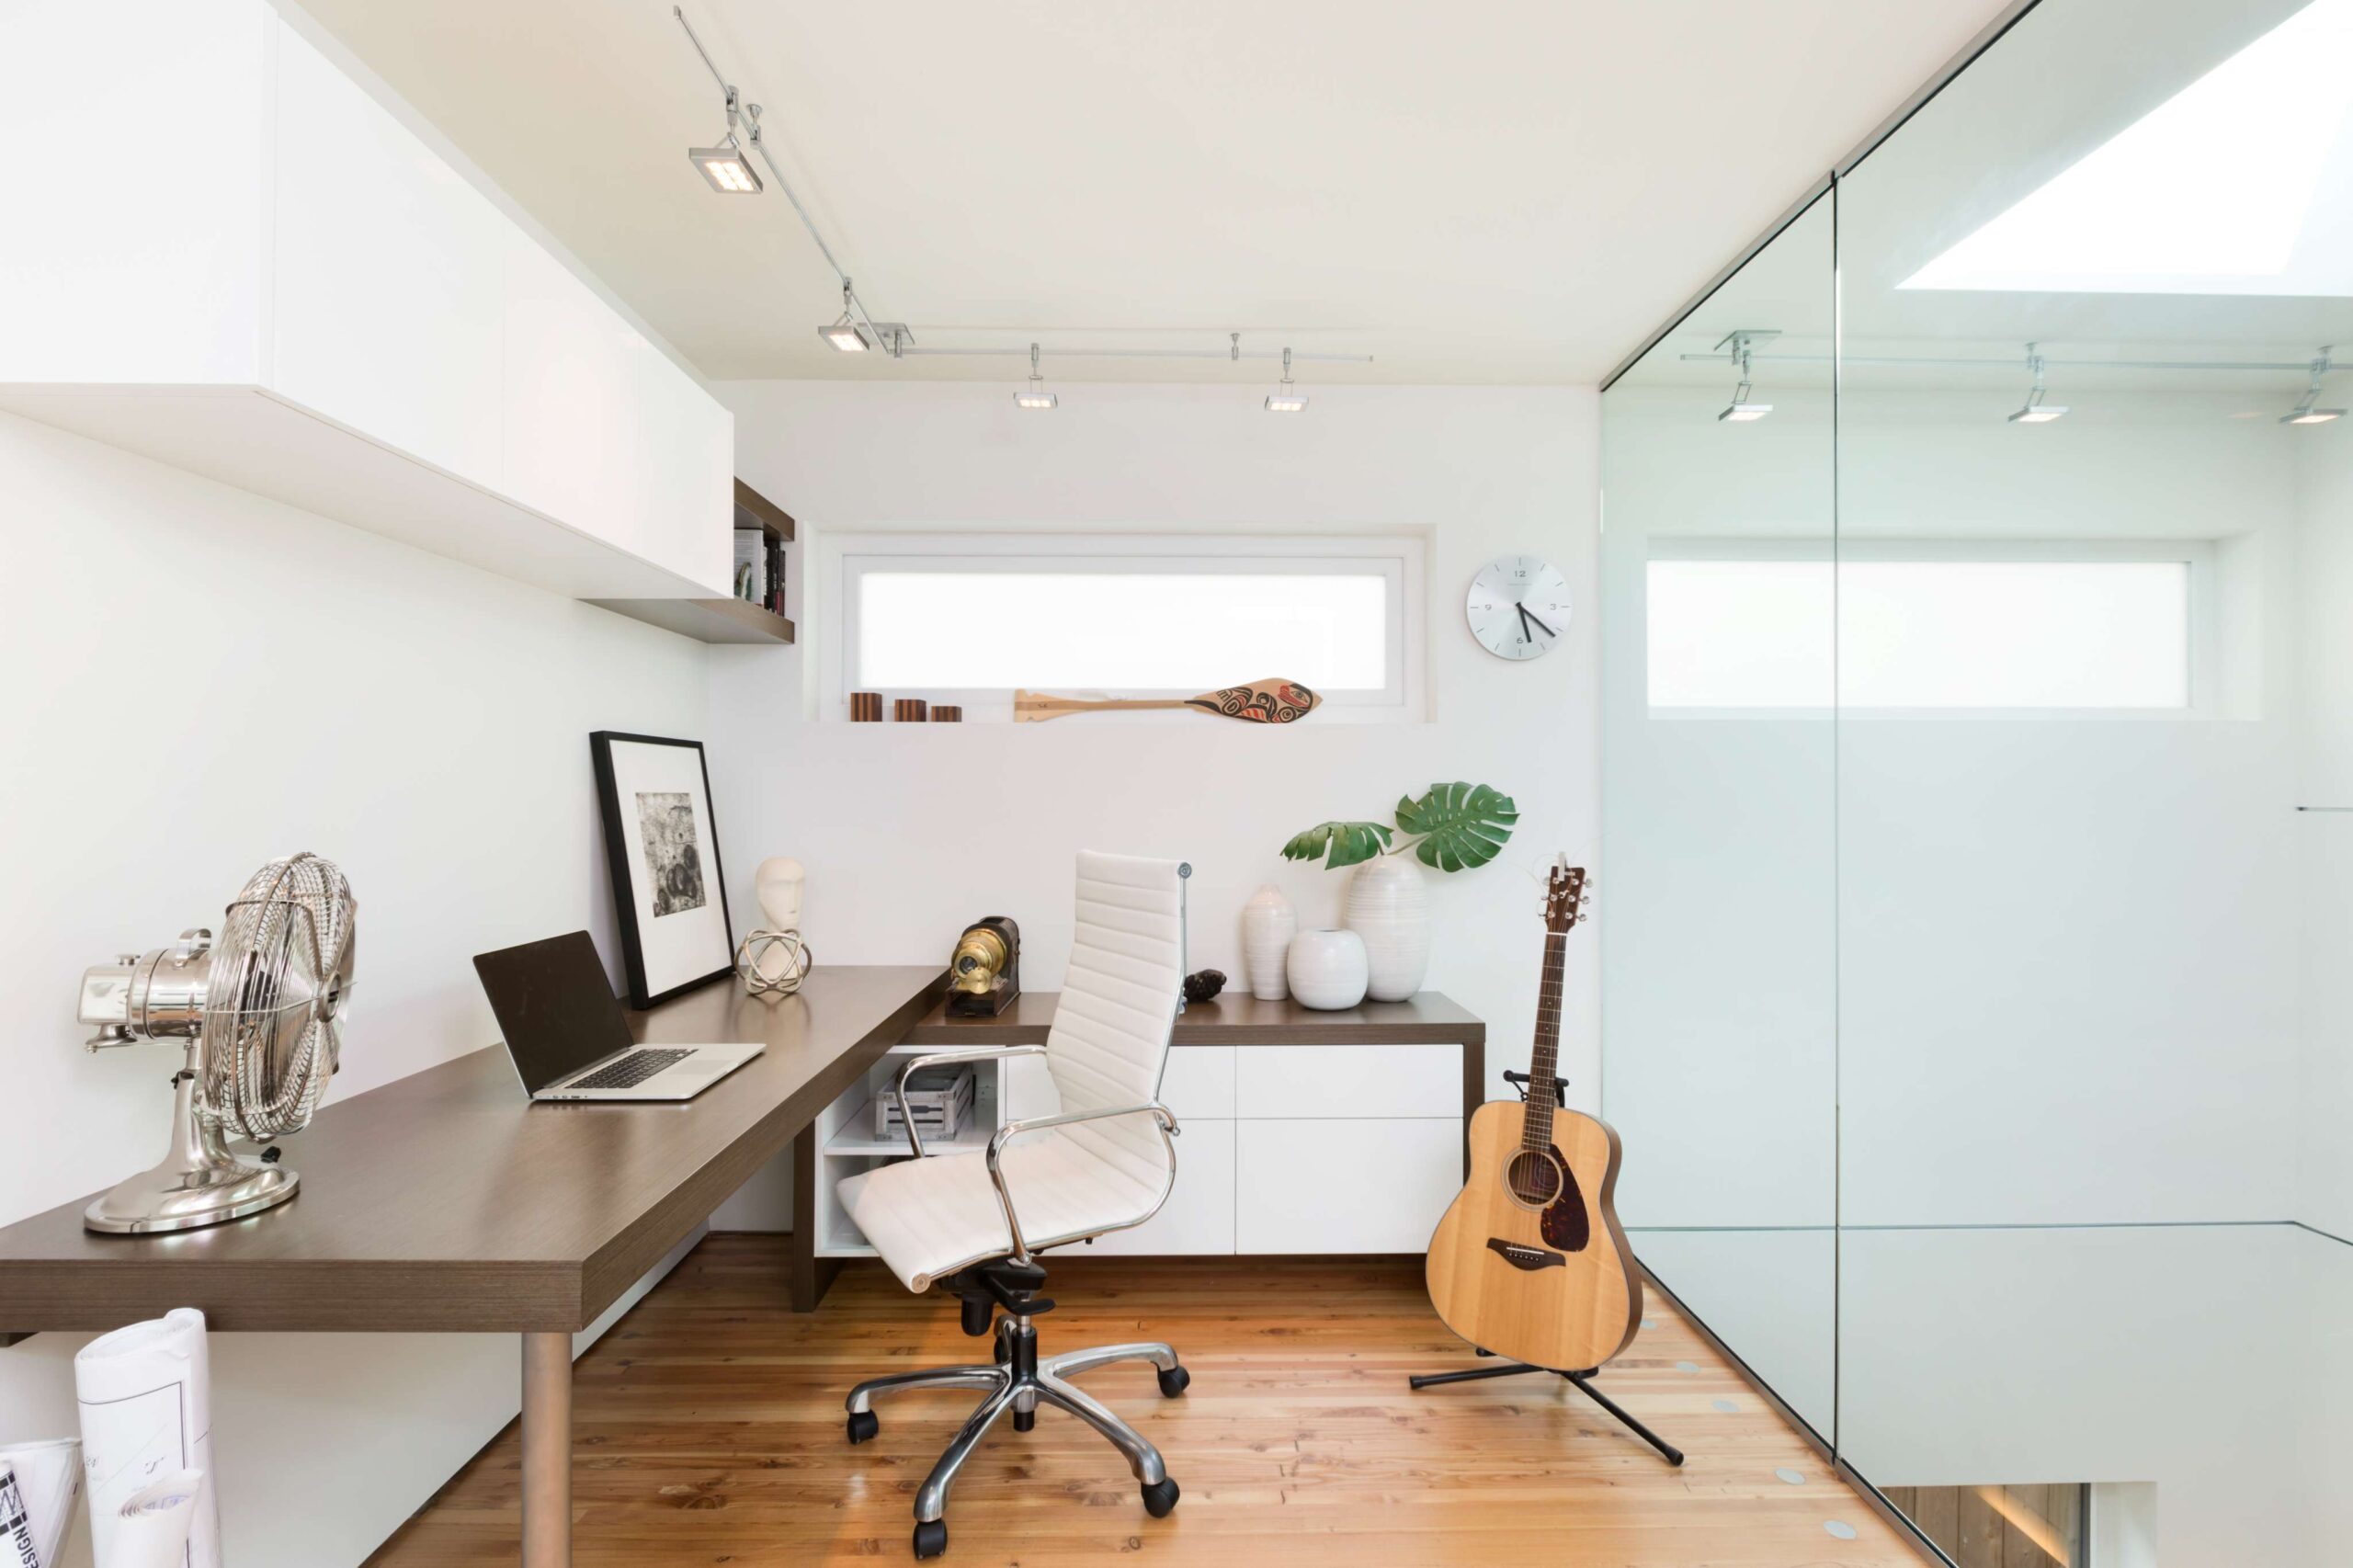 A guitar sits on a stand in a home office with glass walls